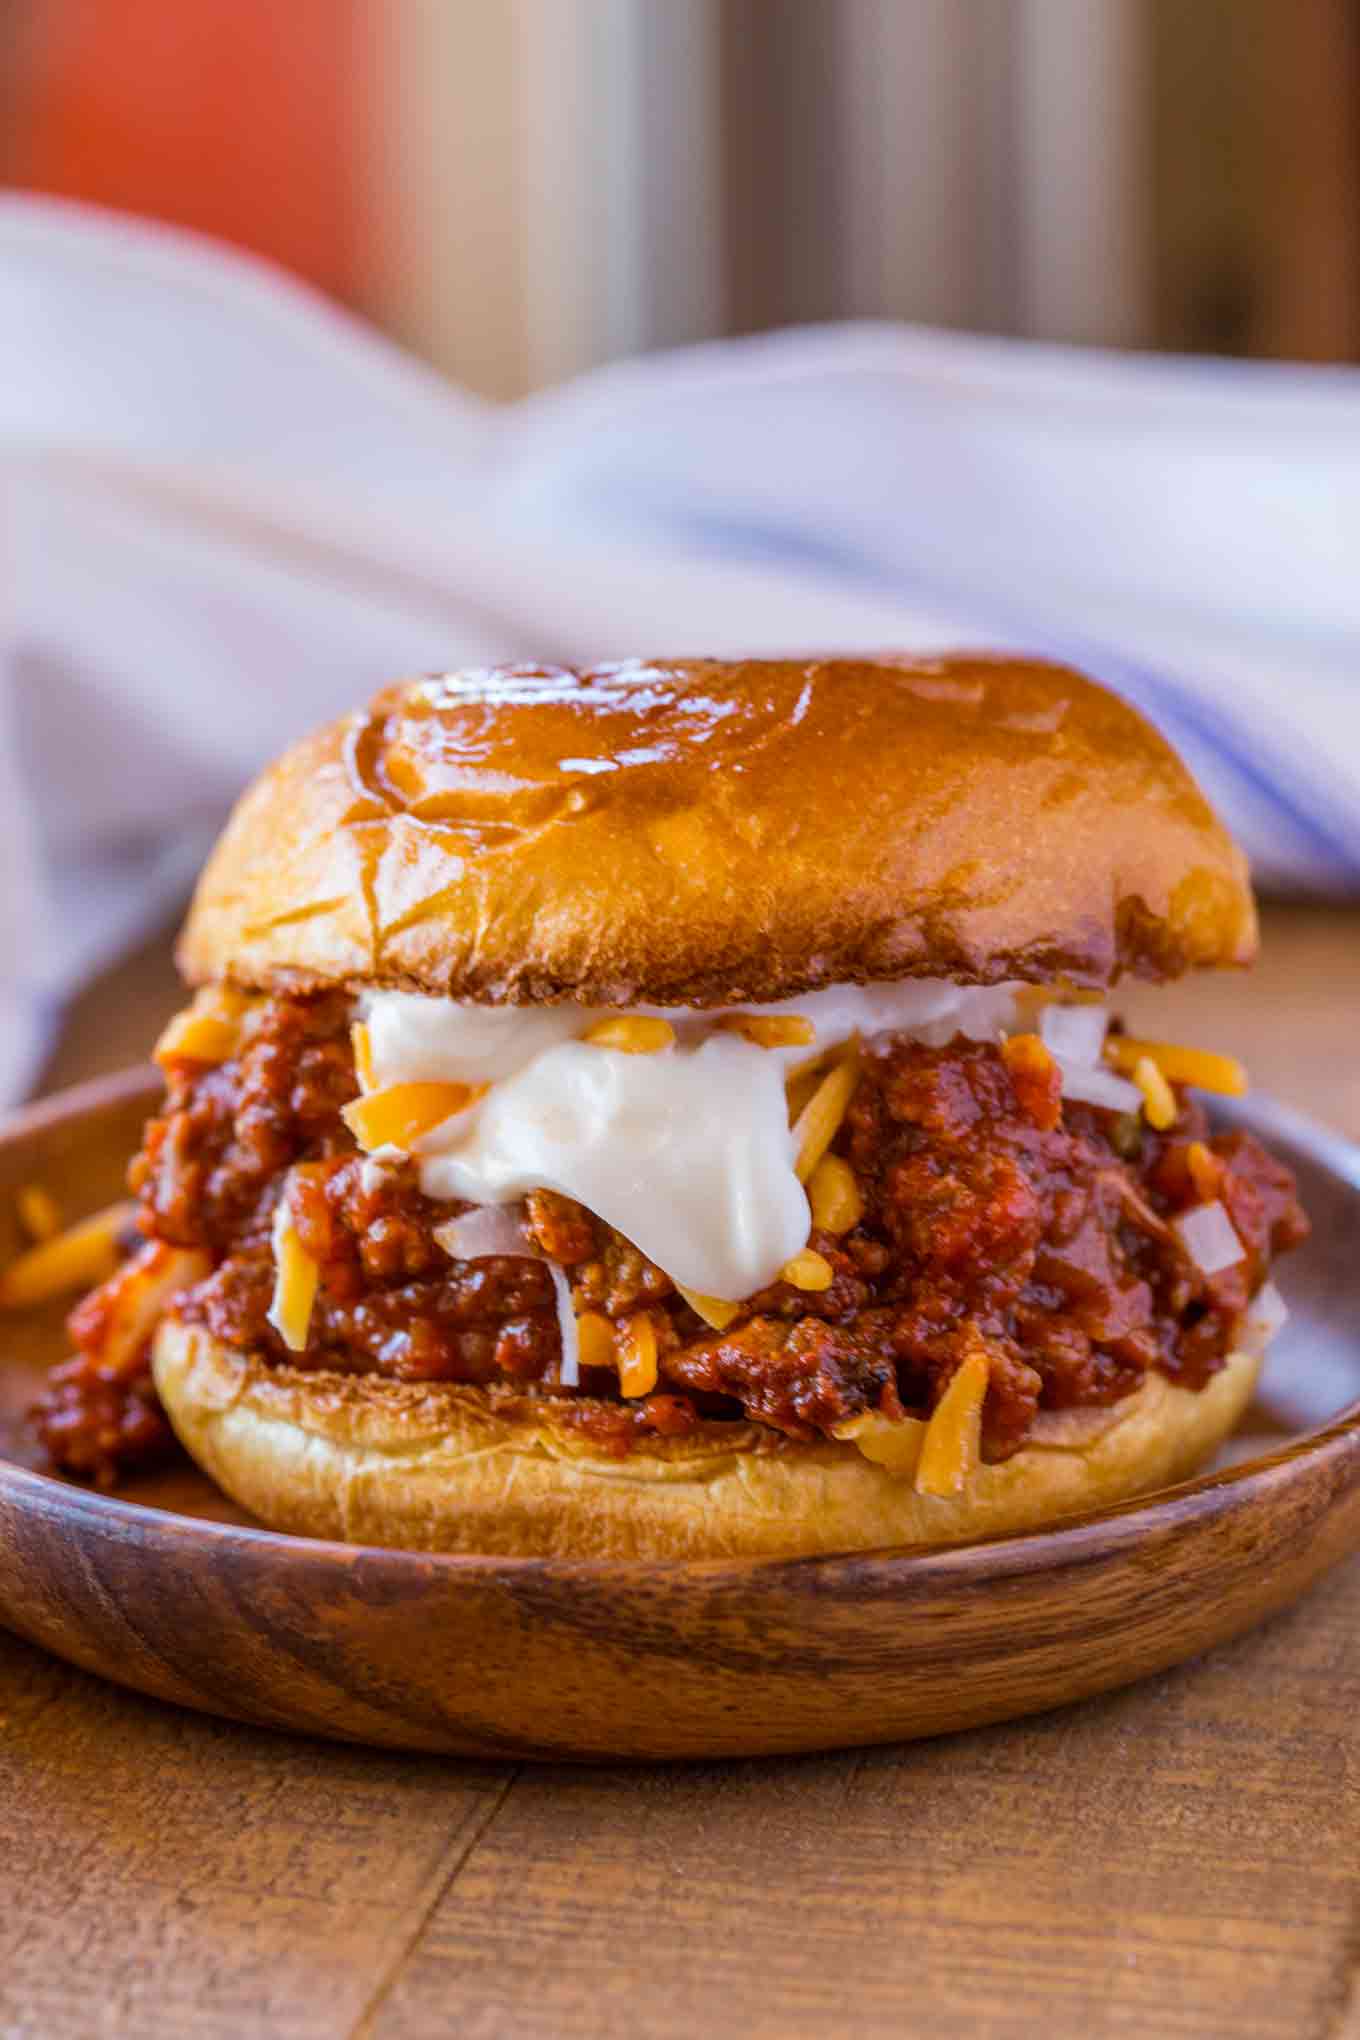 Sloppy Joes meets beef chili